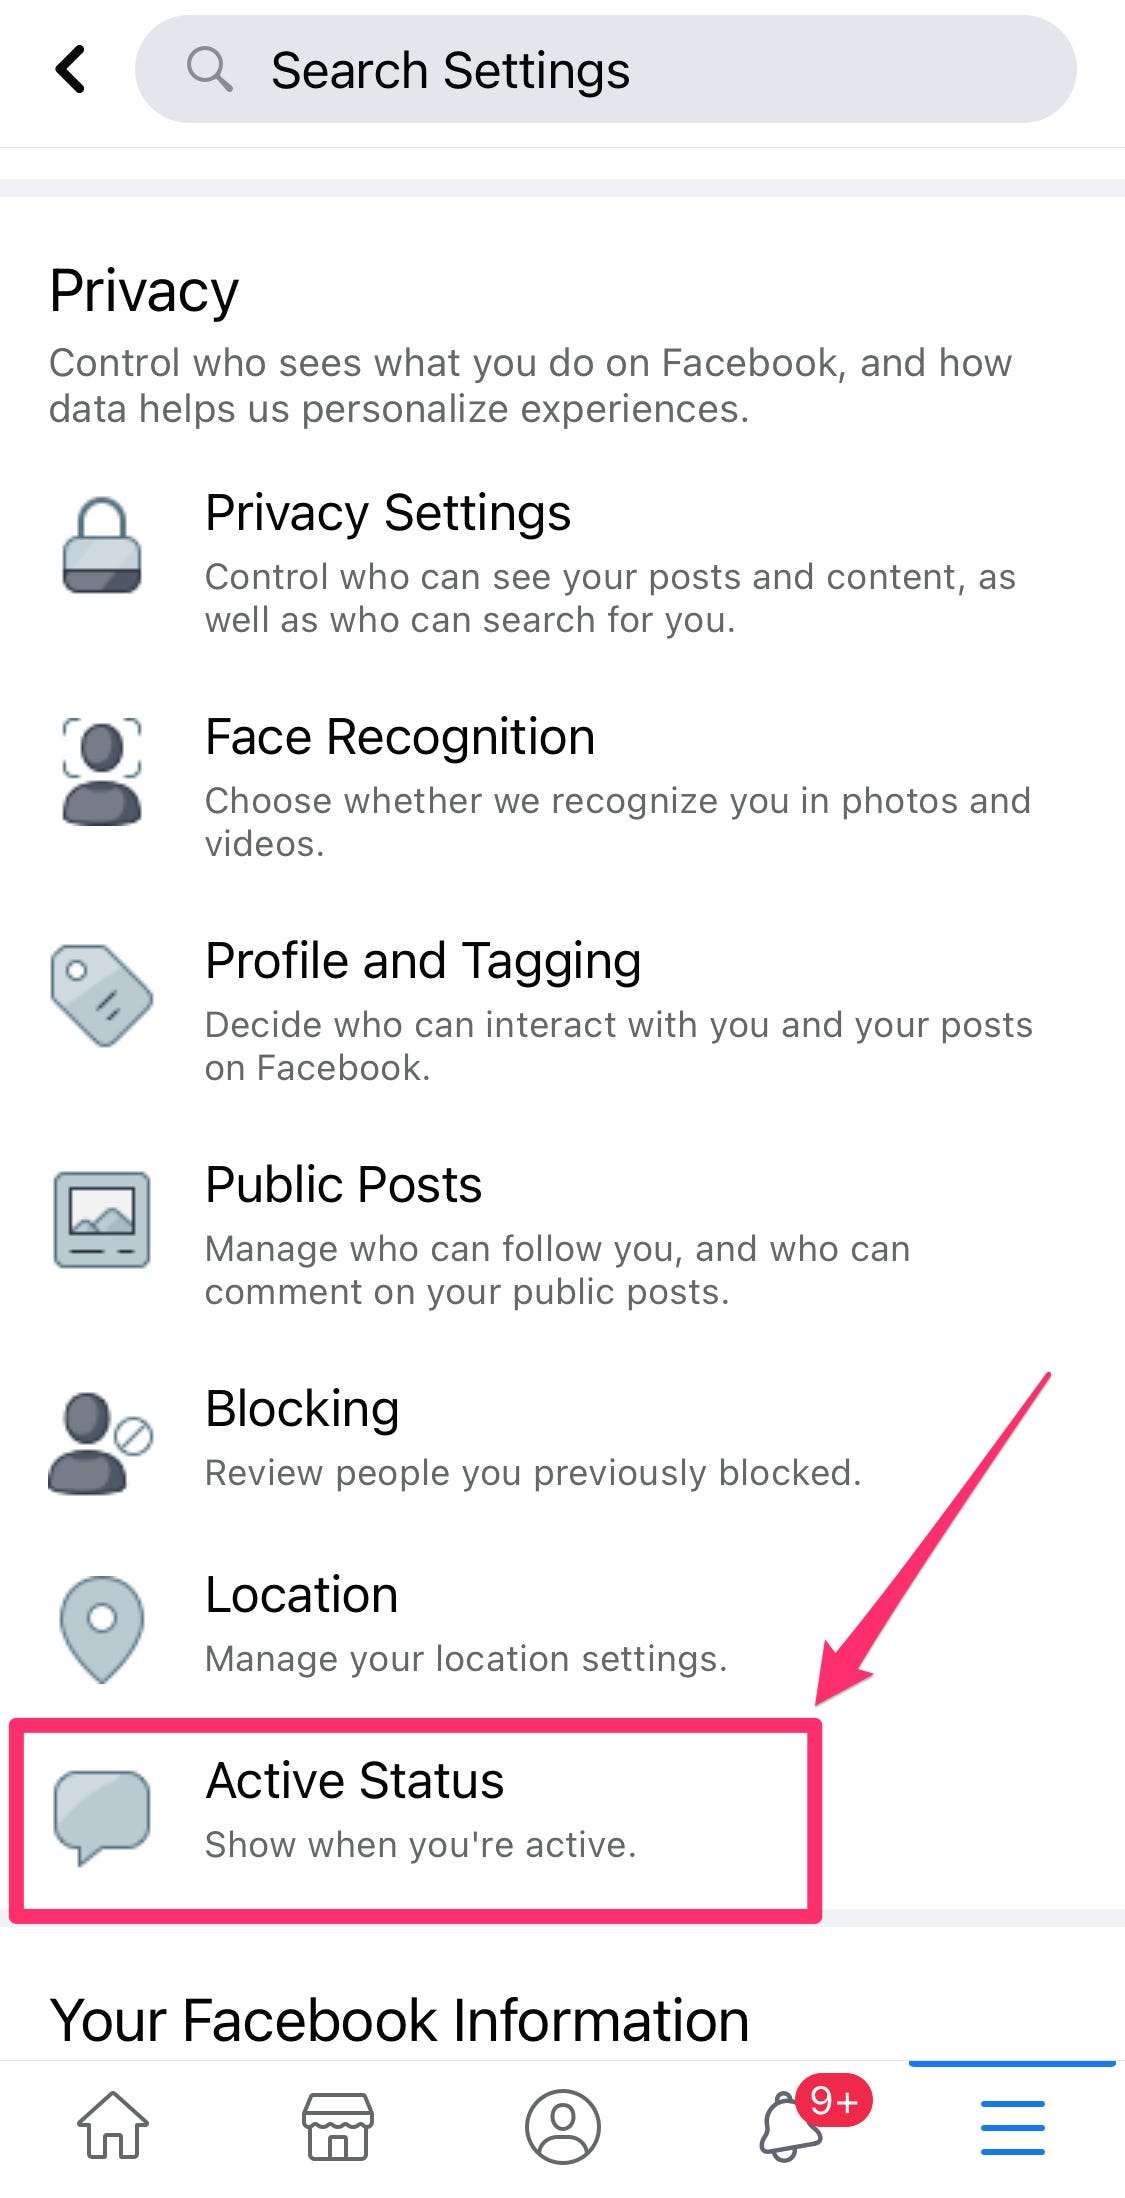 How to turn off active status on Facebook 